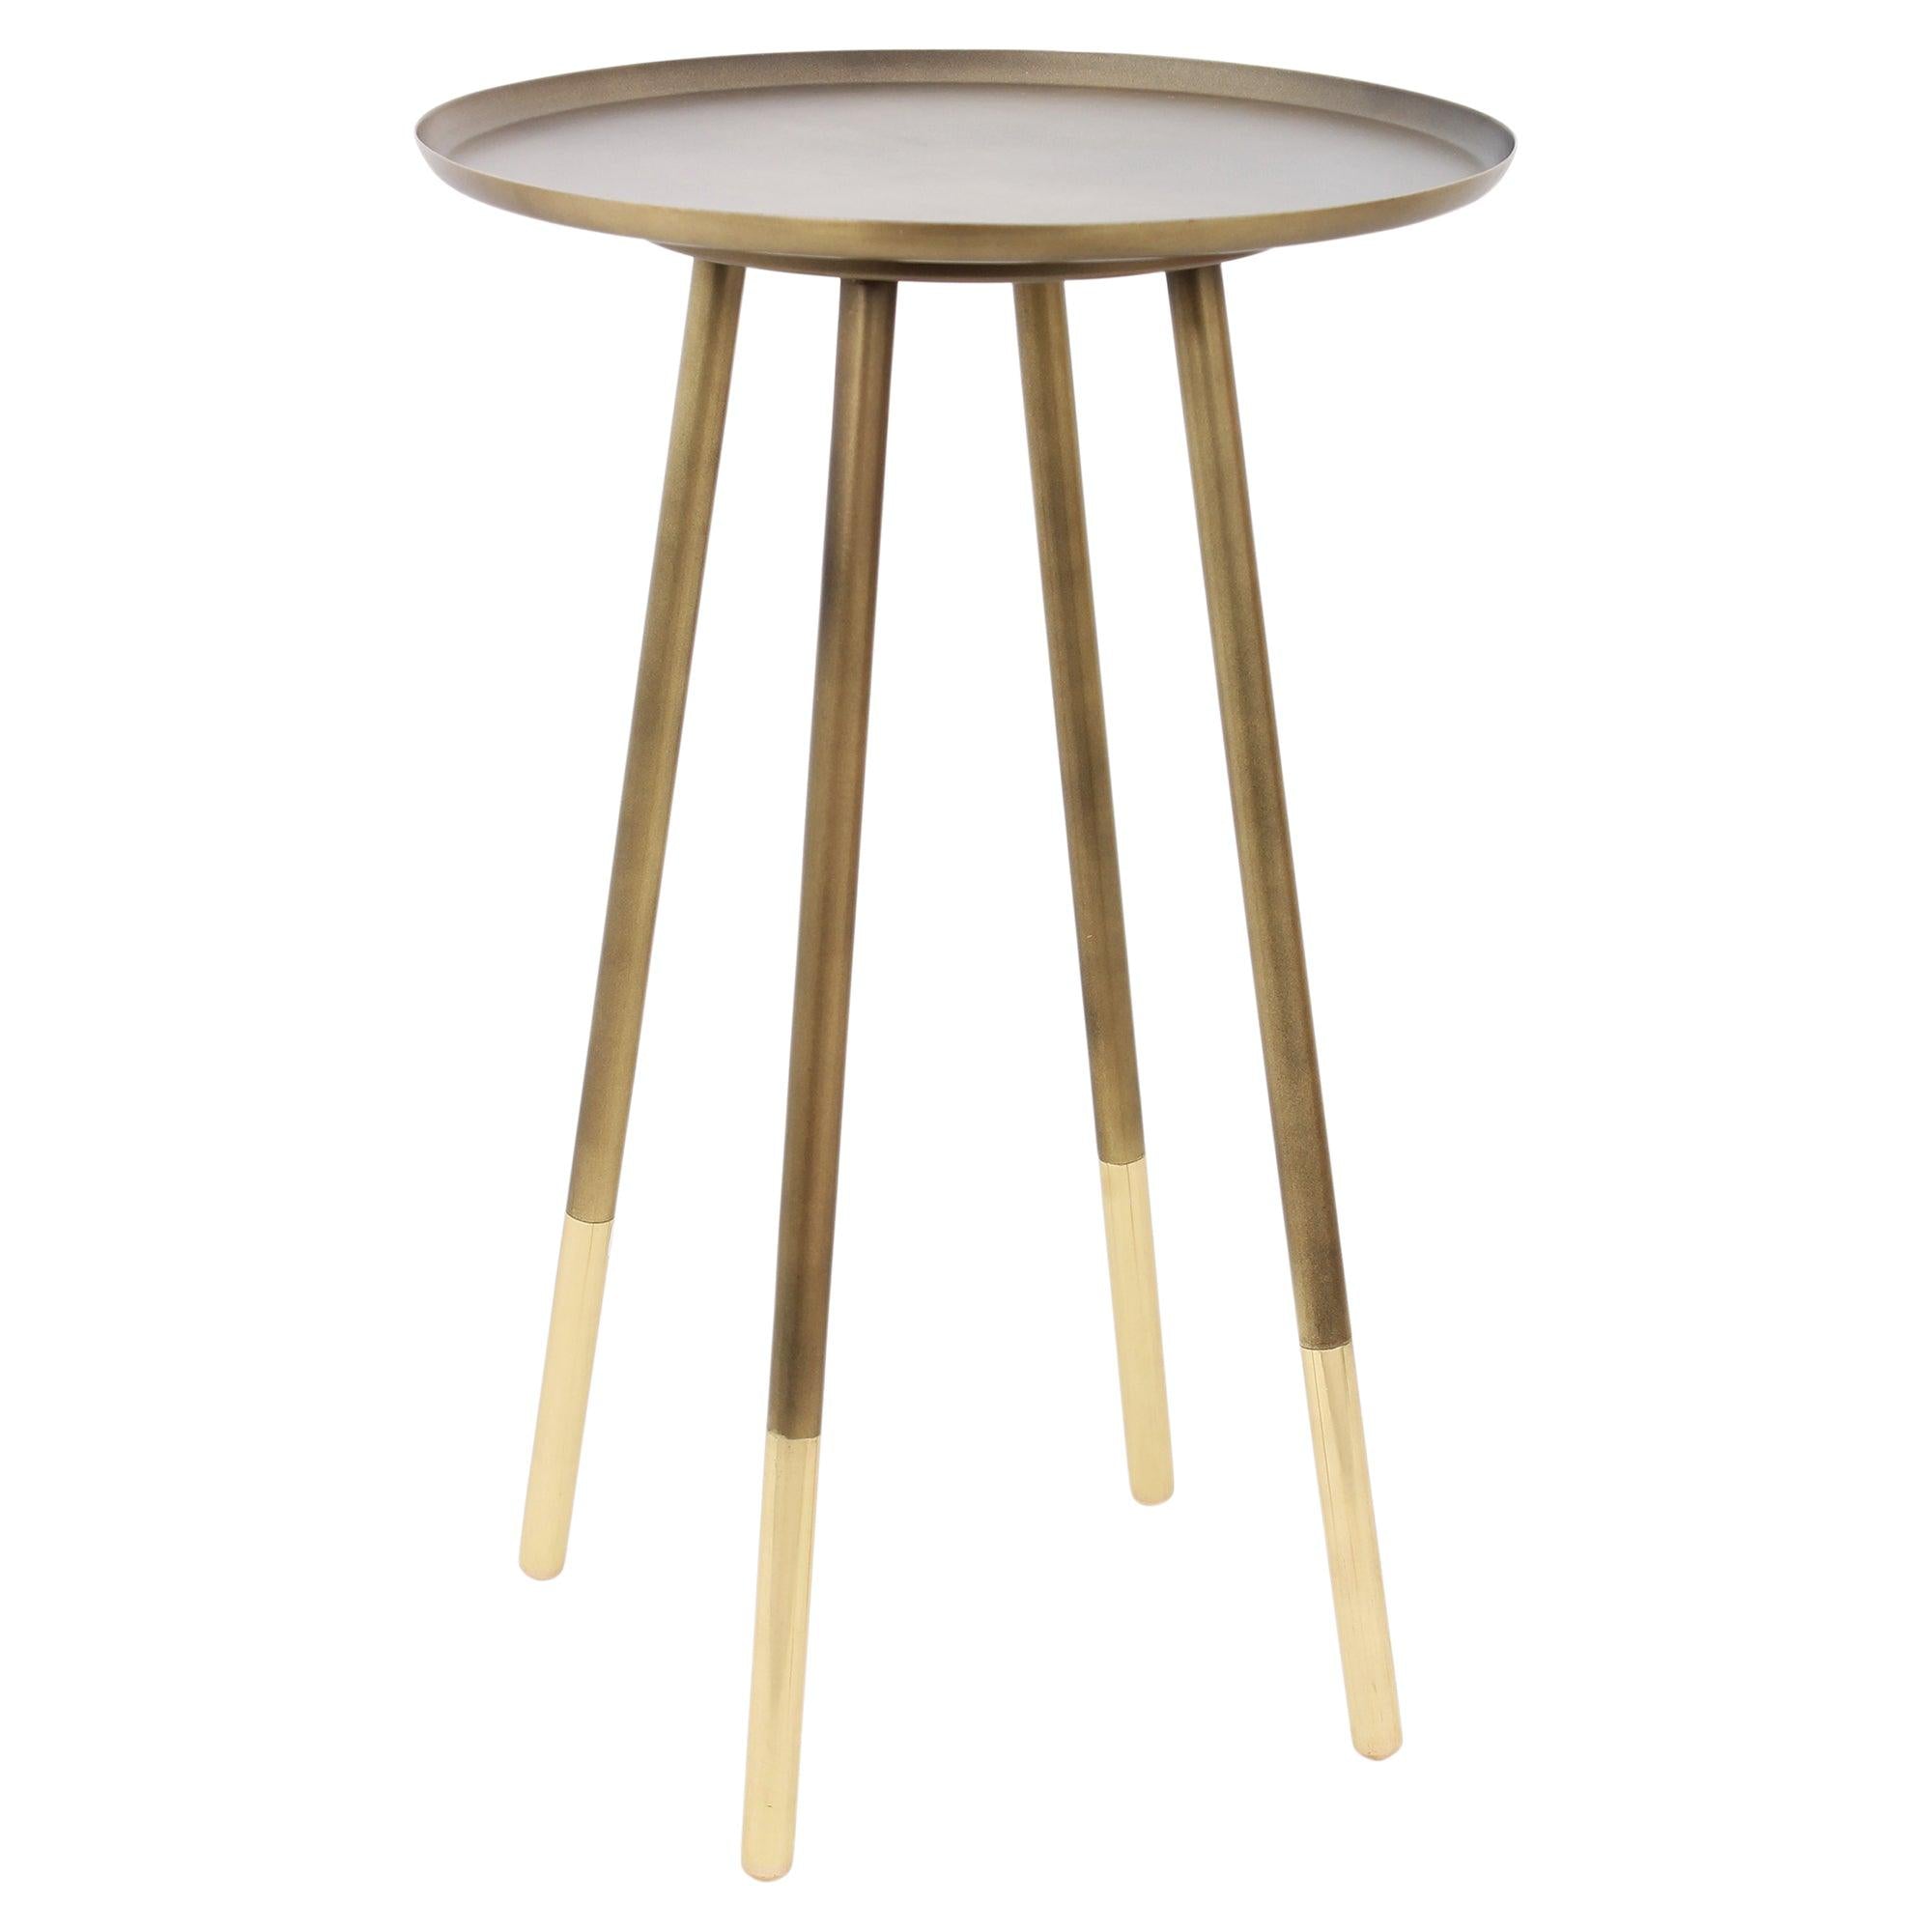 Renwil - Pawn Accent Table - TA112 | Montreal Lighting & Hardware